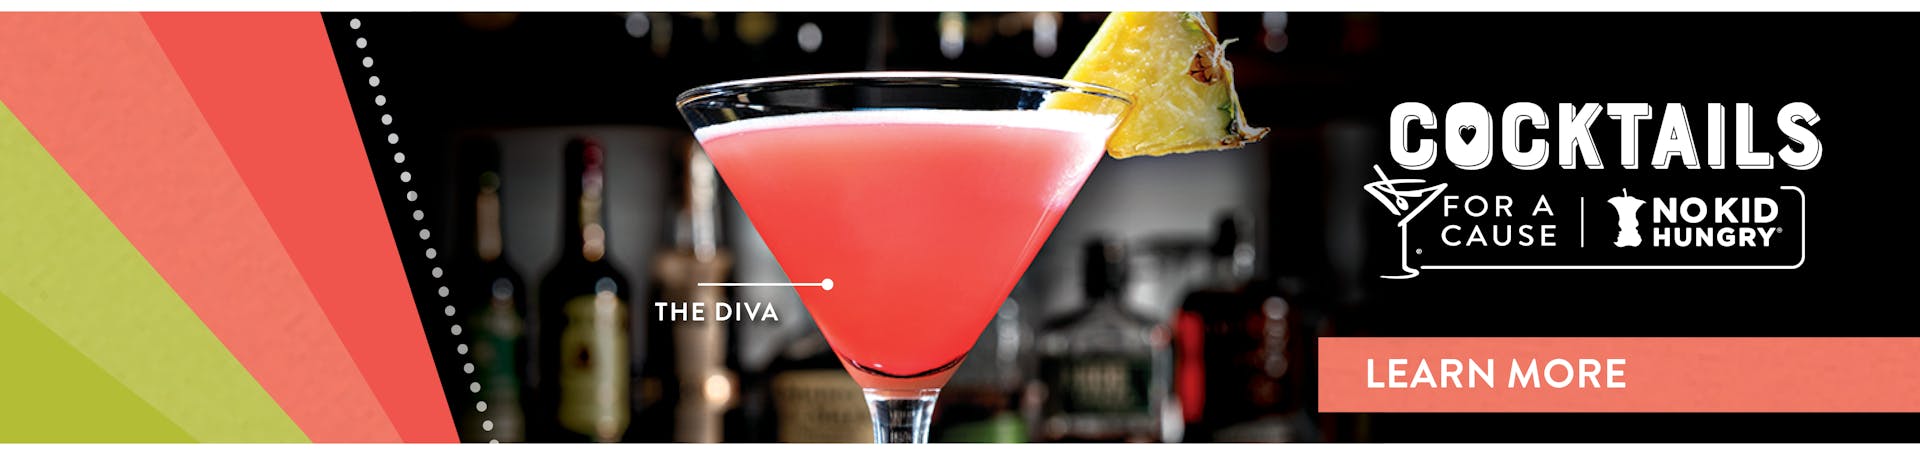 Image of the Diva Martini. Cocktails for a cause, No kid Hingry, Learn more.